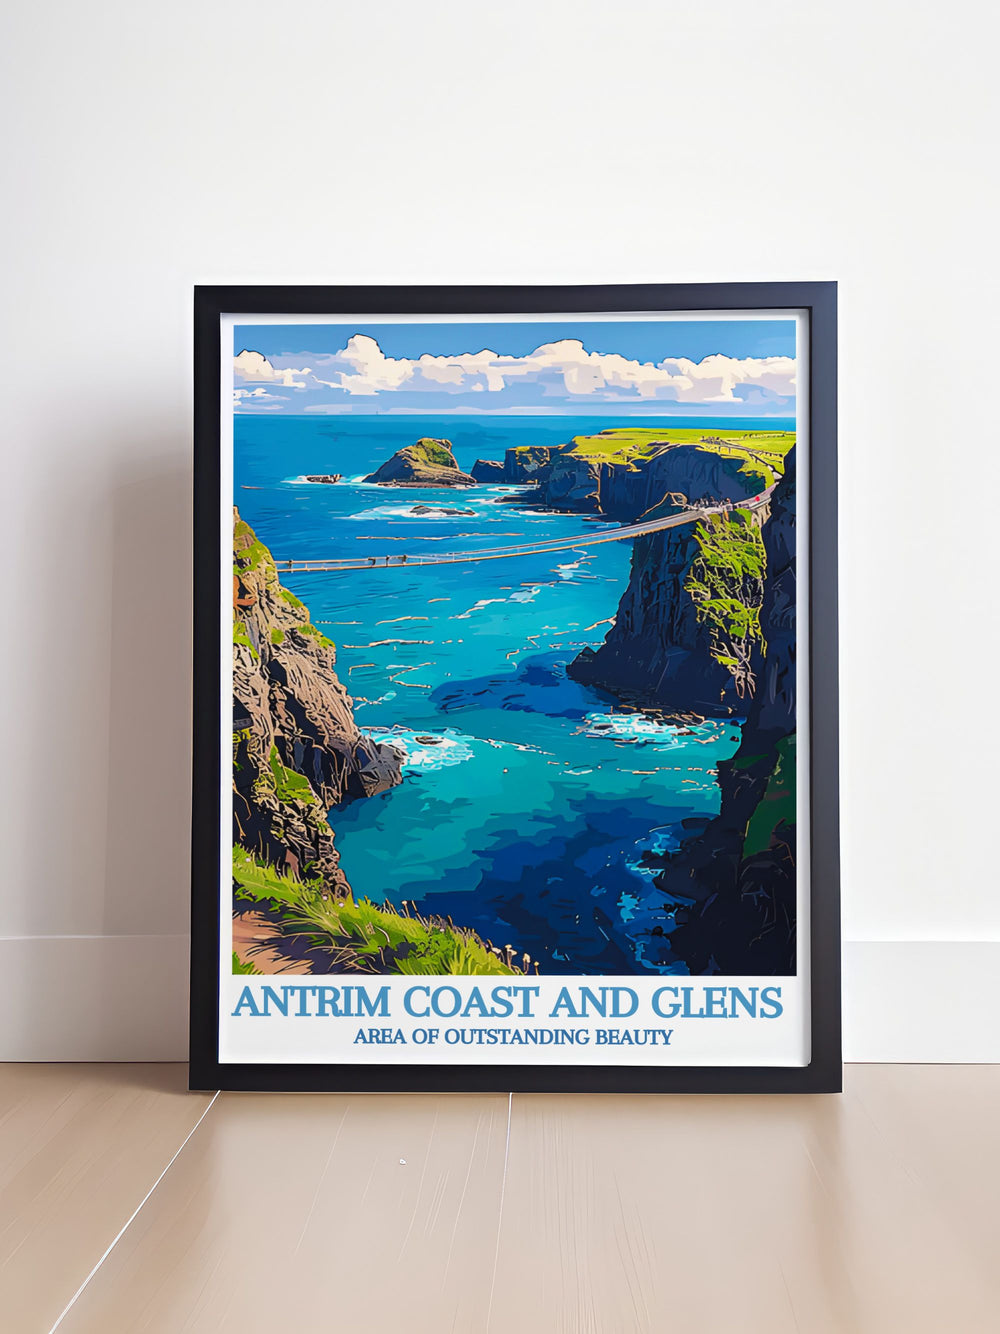 Home decor featuring the Carrick a Rede Rope Bridge, capturing the adventurous spirit and scenic beauty of this famous Irish landmark.